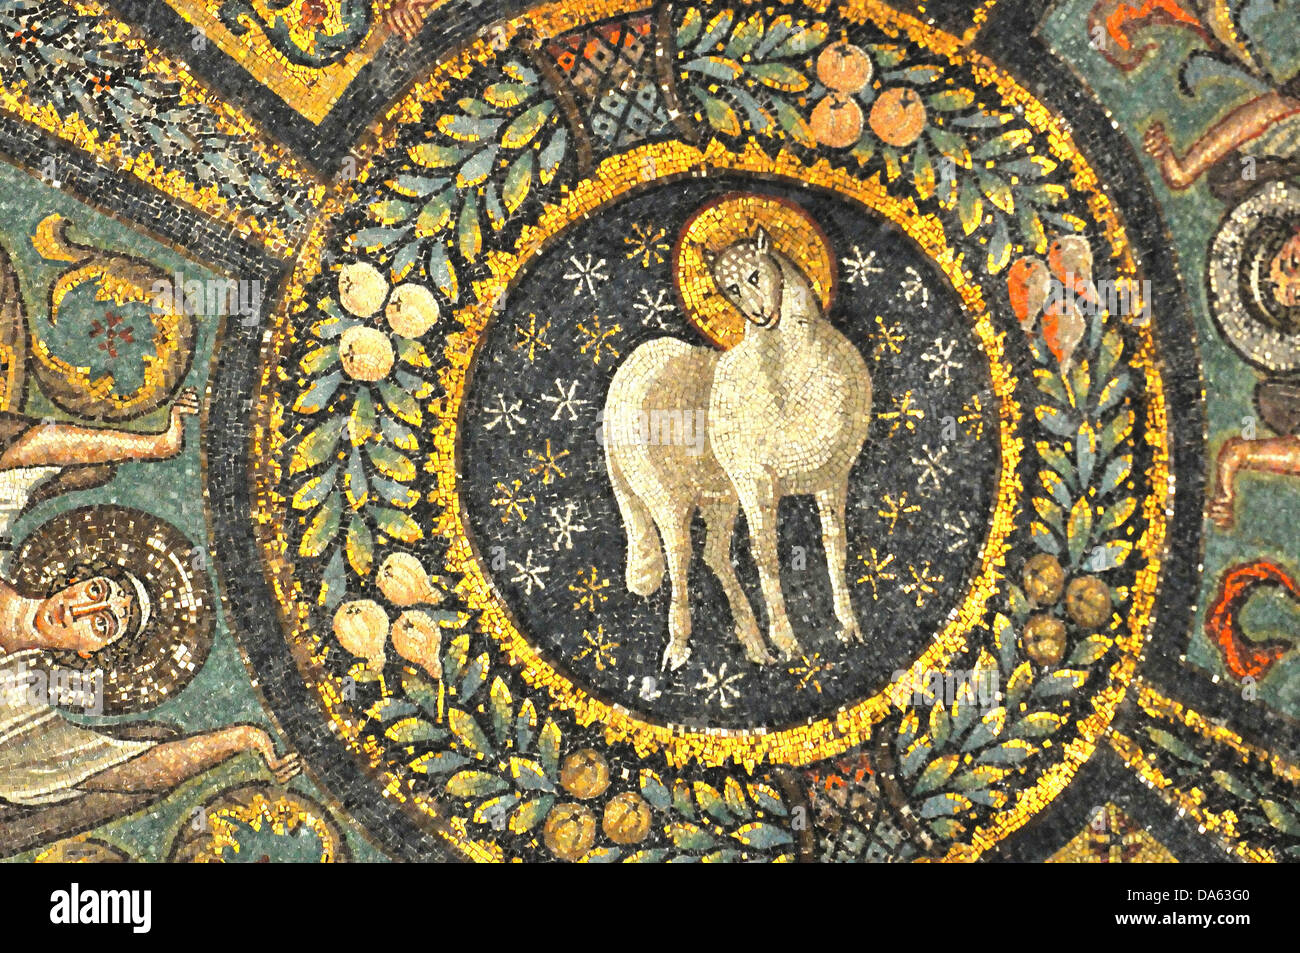 Ancient Byzatine mosaics of the lamb of god in heaven, supported by angels. From the UNESCO listed basilica of Saint Vitalis, in Stock Photo